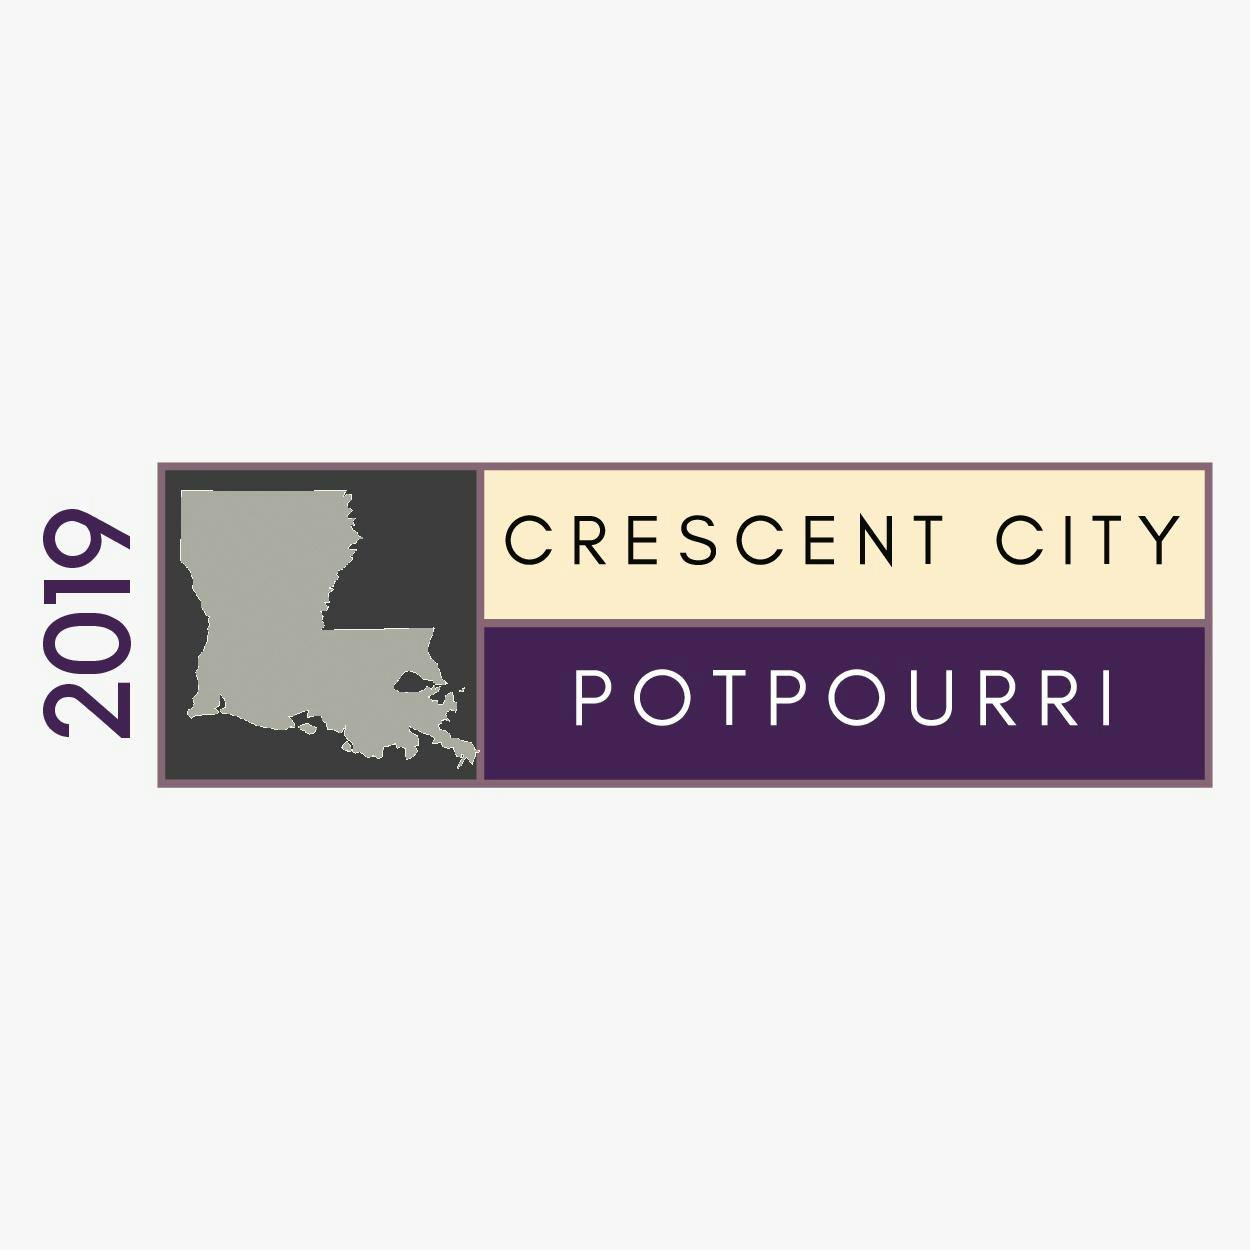 2019 LA Chapter of AAP Annual Meeting Crescent City Potpourri